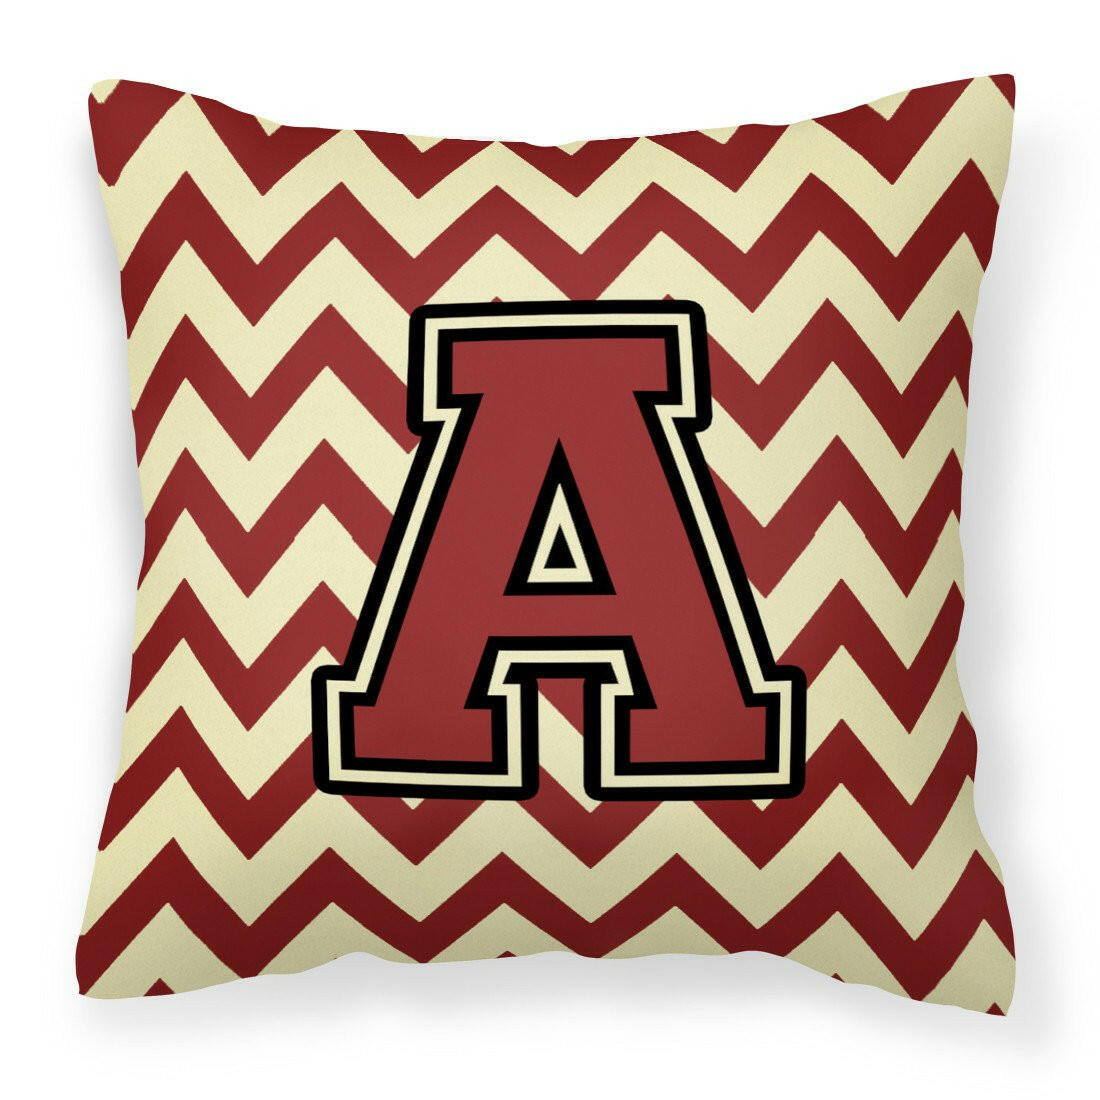 Letter A Chevron Maroon and Gold Fabric Decorative Pillow CJ1061-APW1414 by Caroline's Treasures